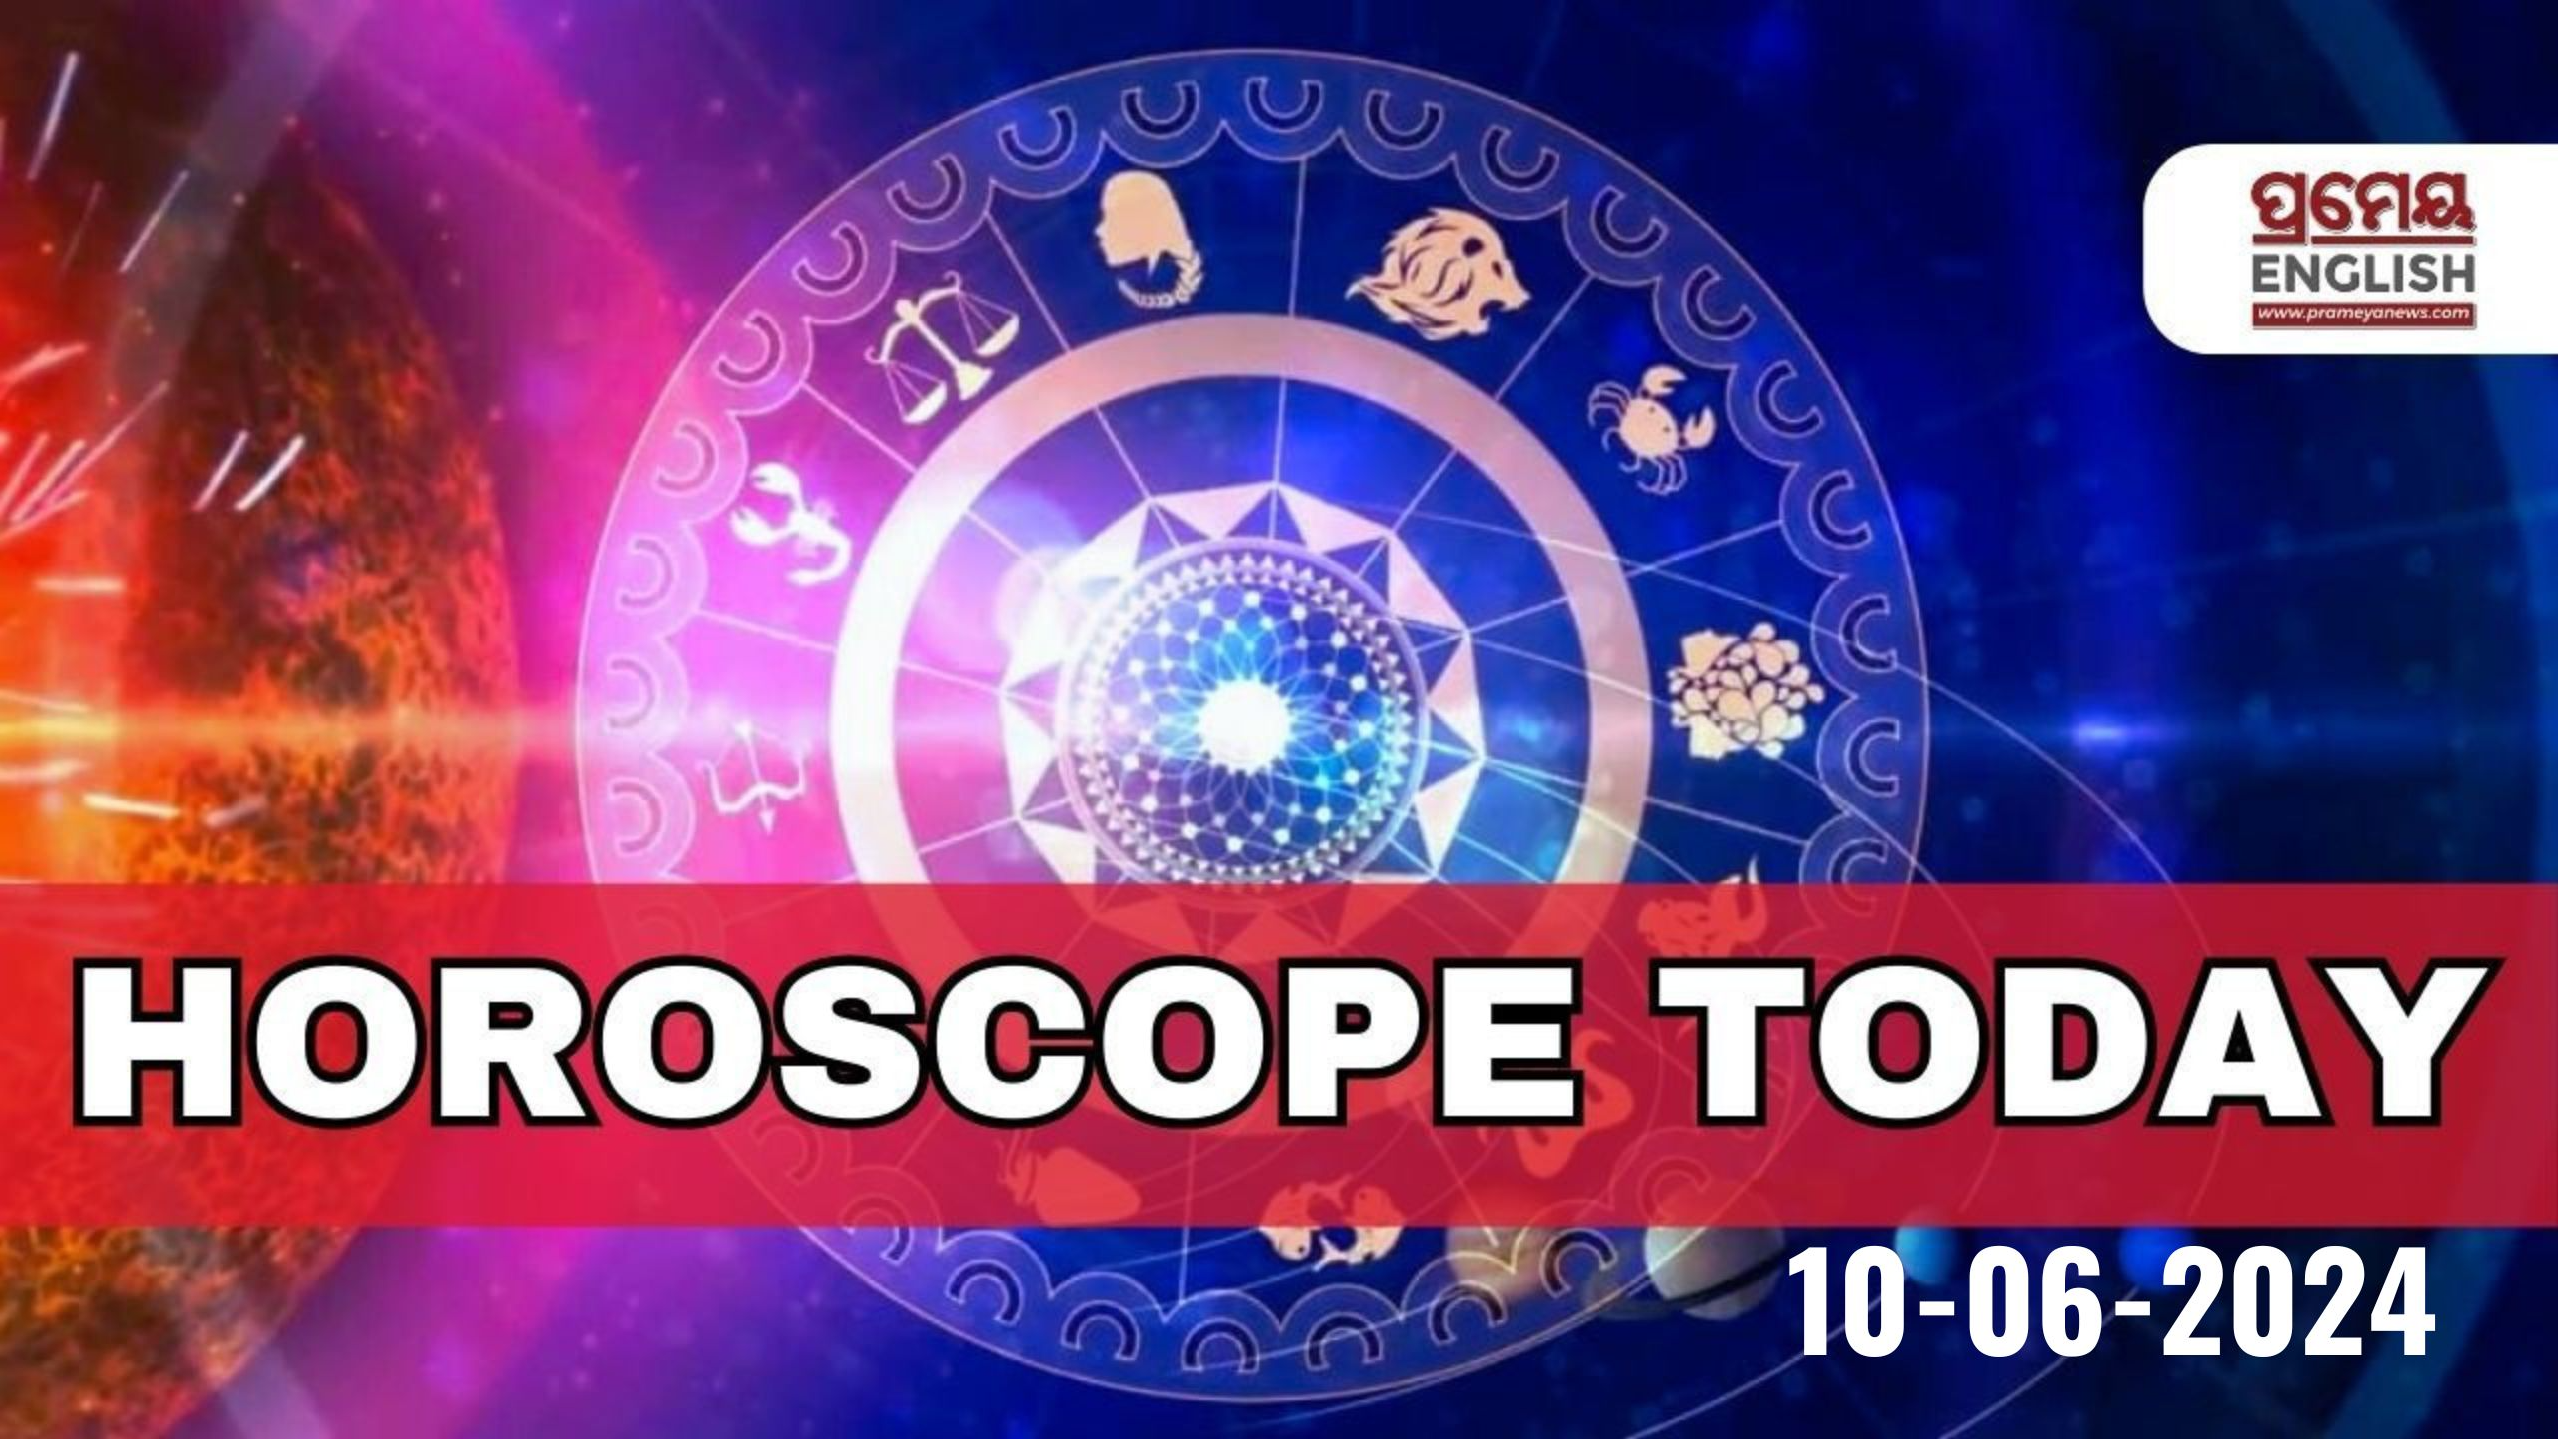 Horoscope Today: Astrological prediction for June 10, 2024